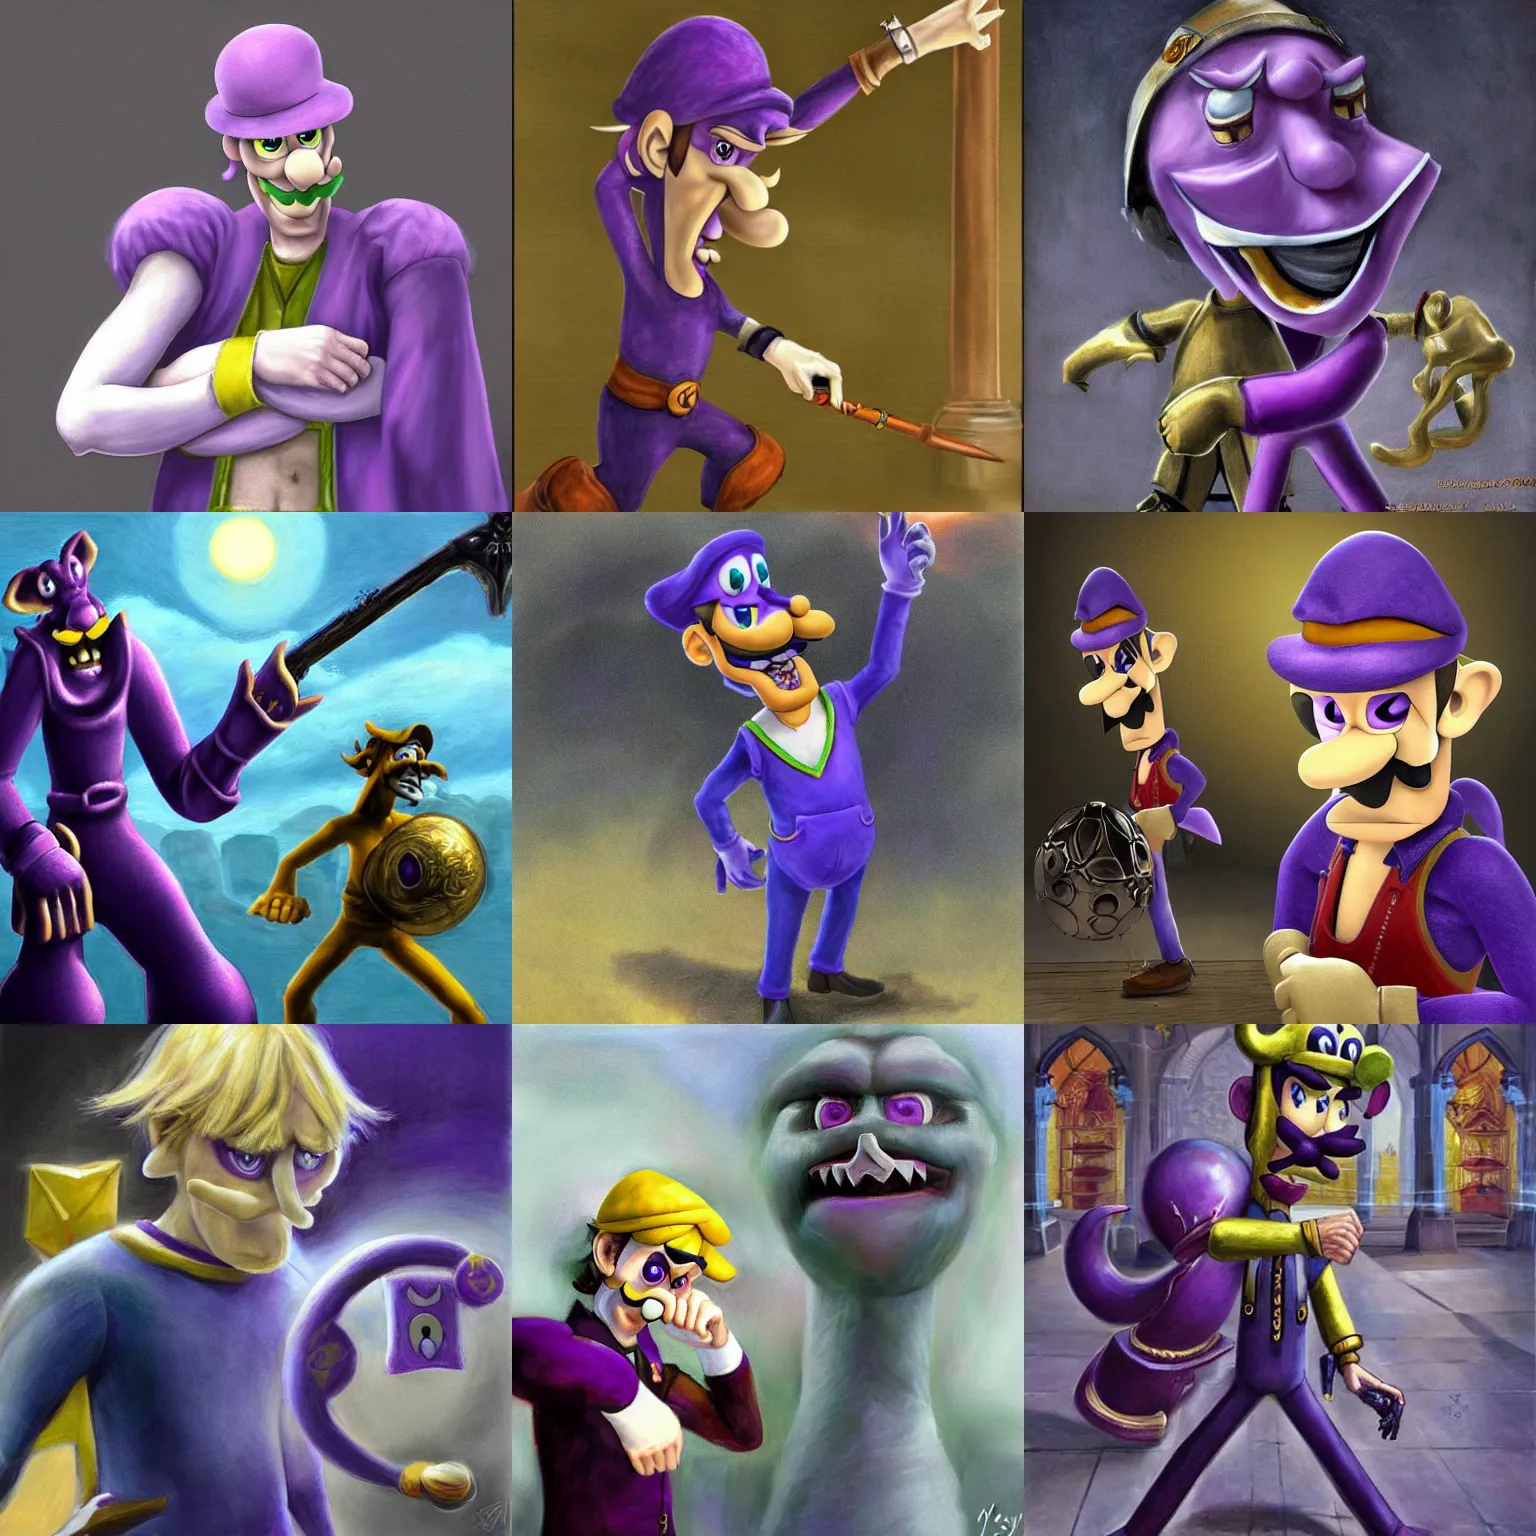 Download Waluigi wallpapers for mobile phone free Waluigi HD pictures